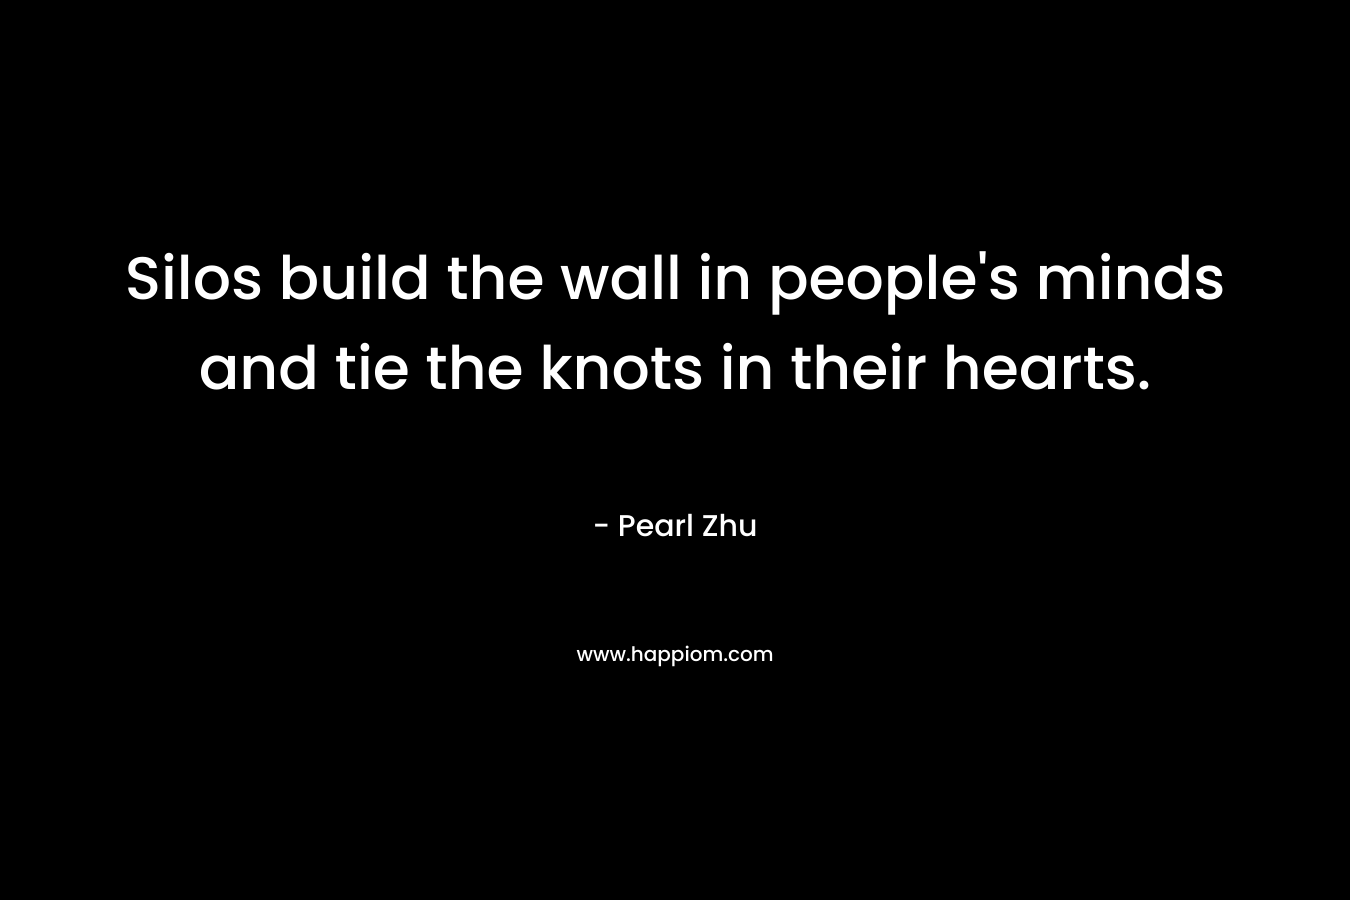 Silos build the wall in people's minds and tie the knots in their hearts.